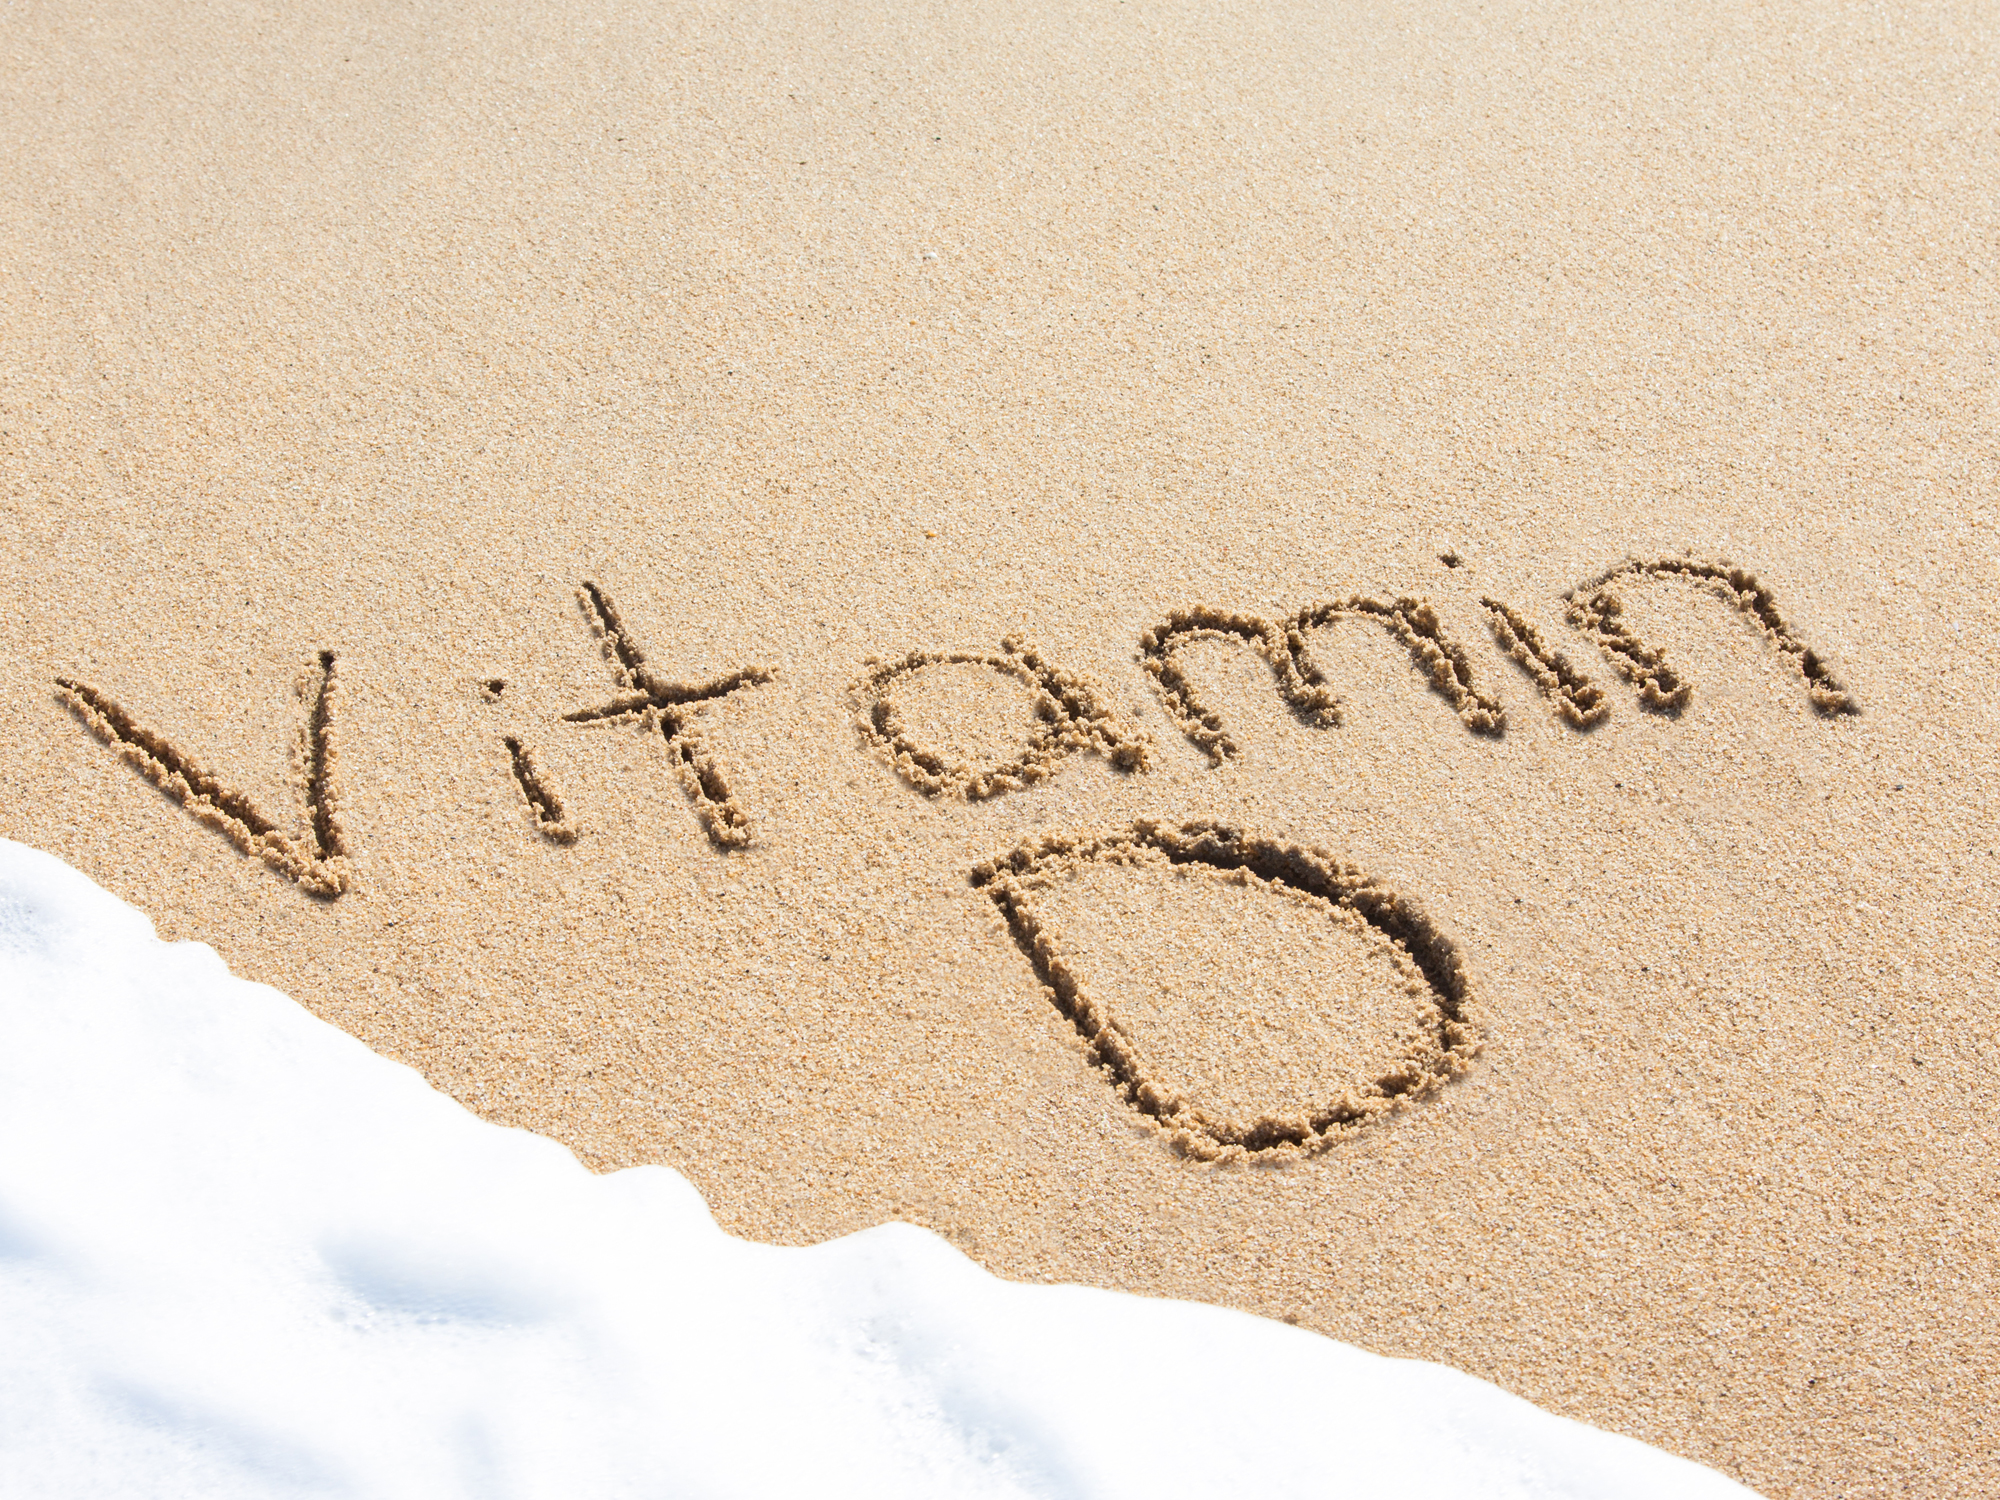 How much vitamin D protects against breast cancer?